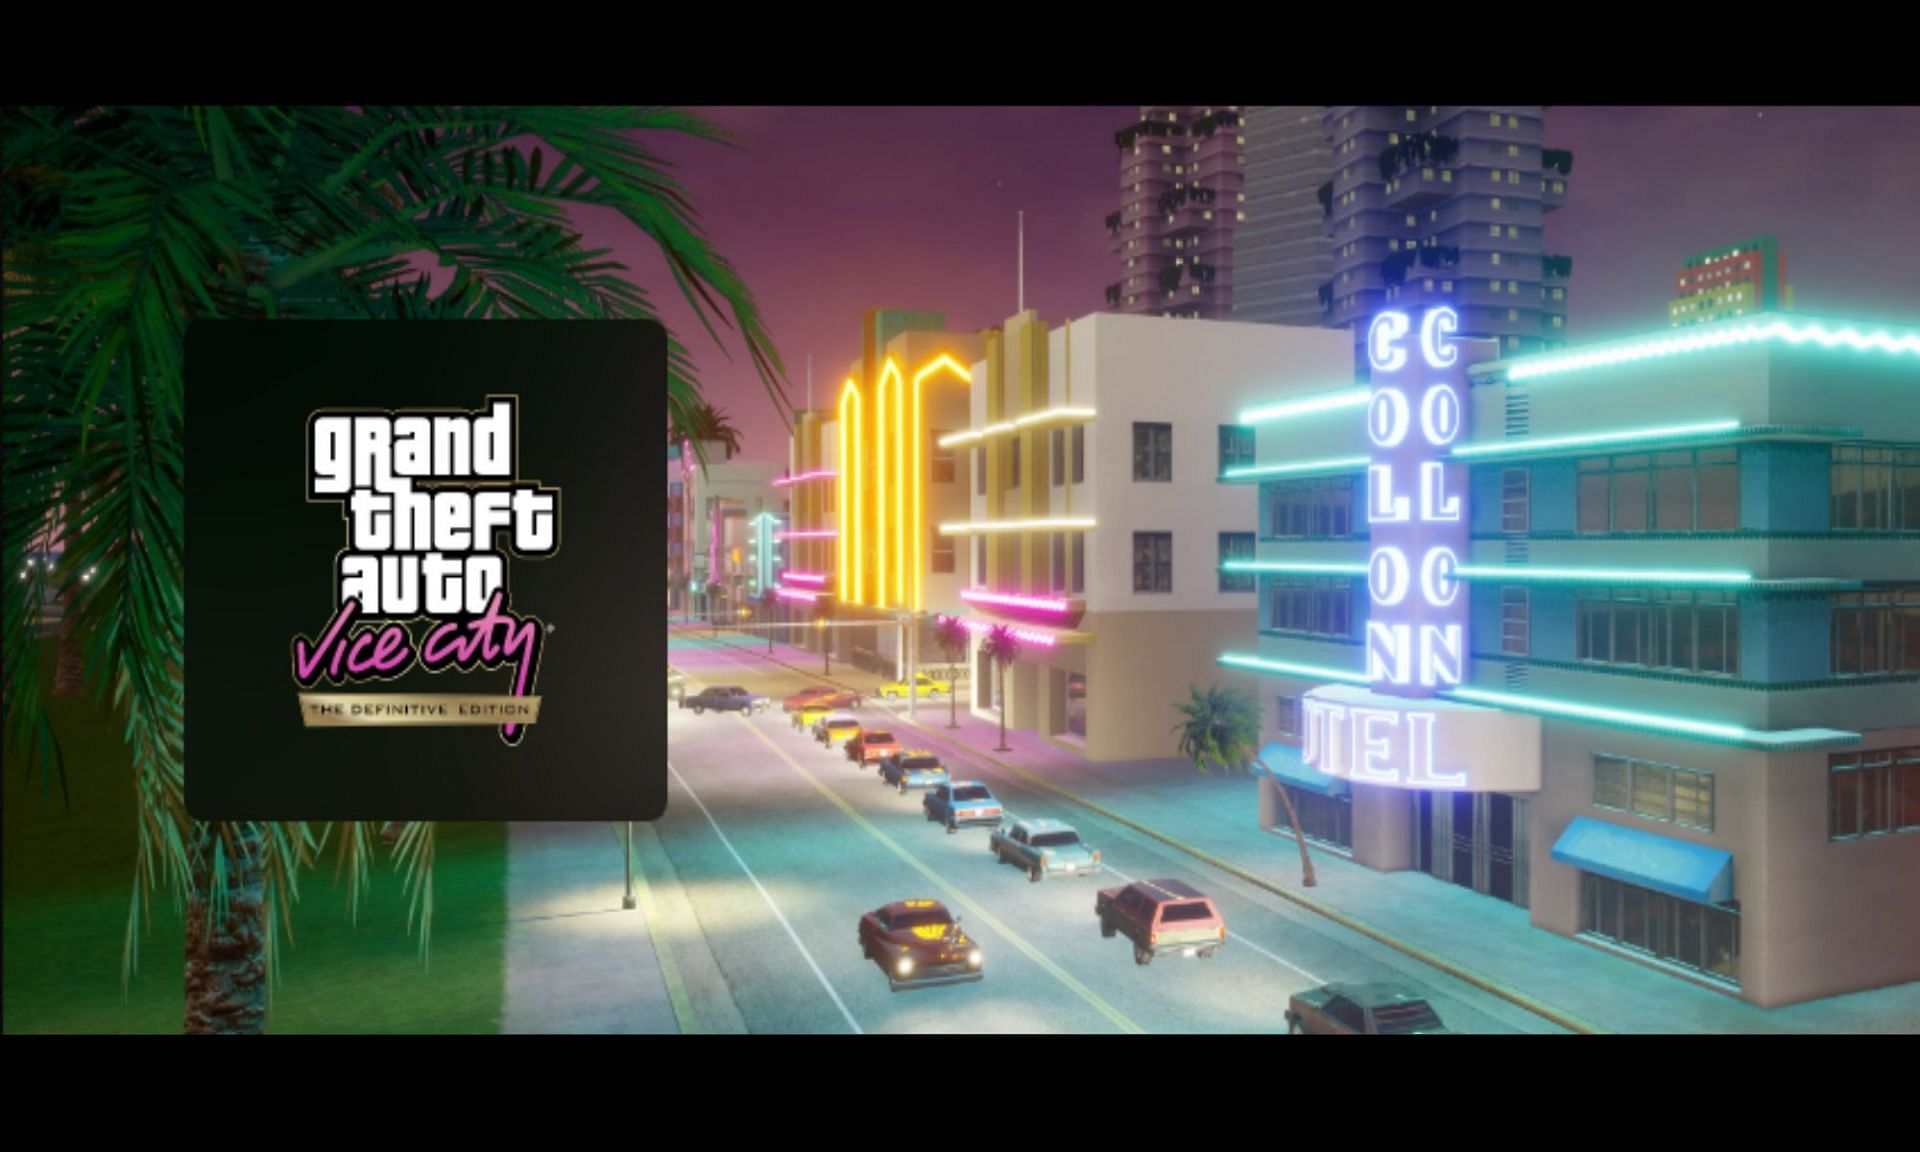 Vice City is more vibrant in GTA The Trilogy Definitive Edition (Image via Rockstar Games)